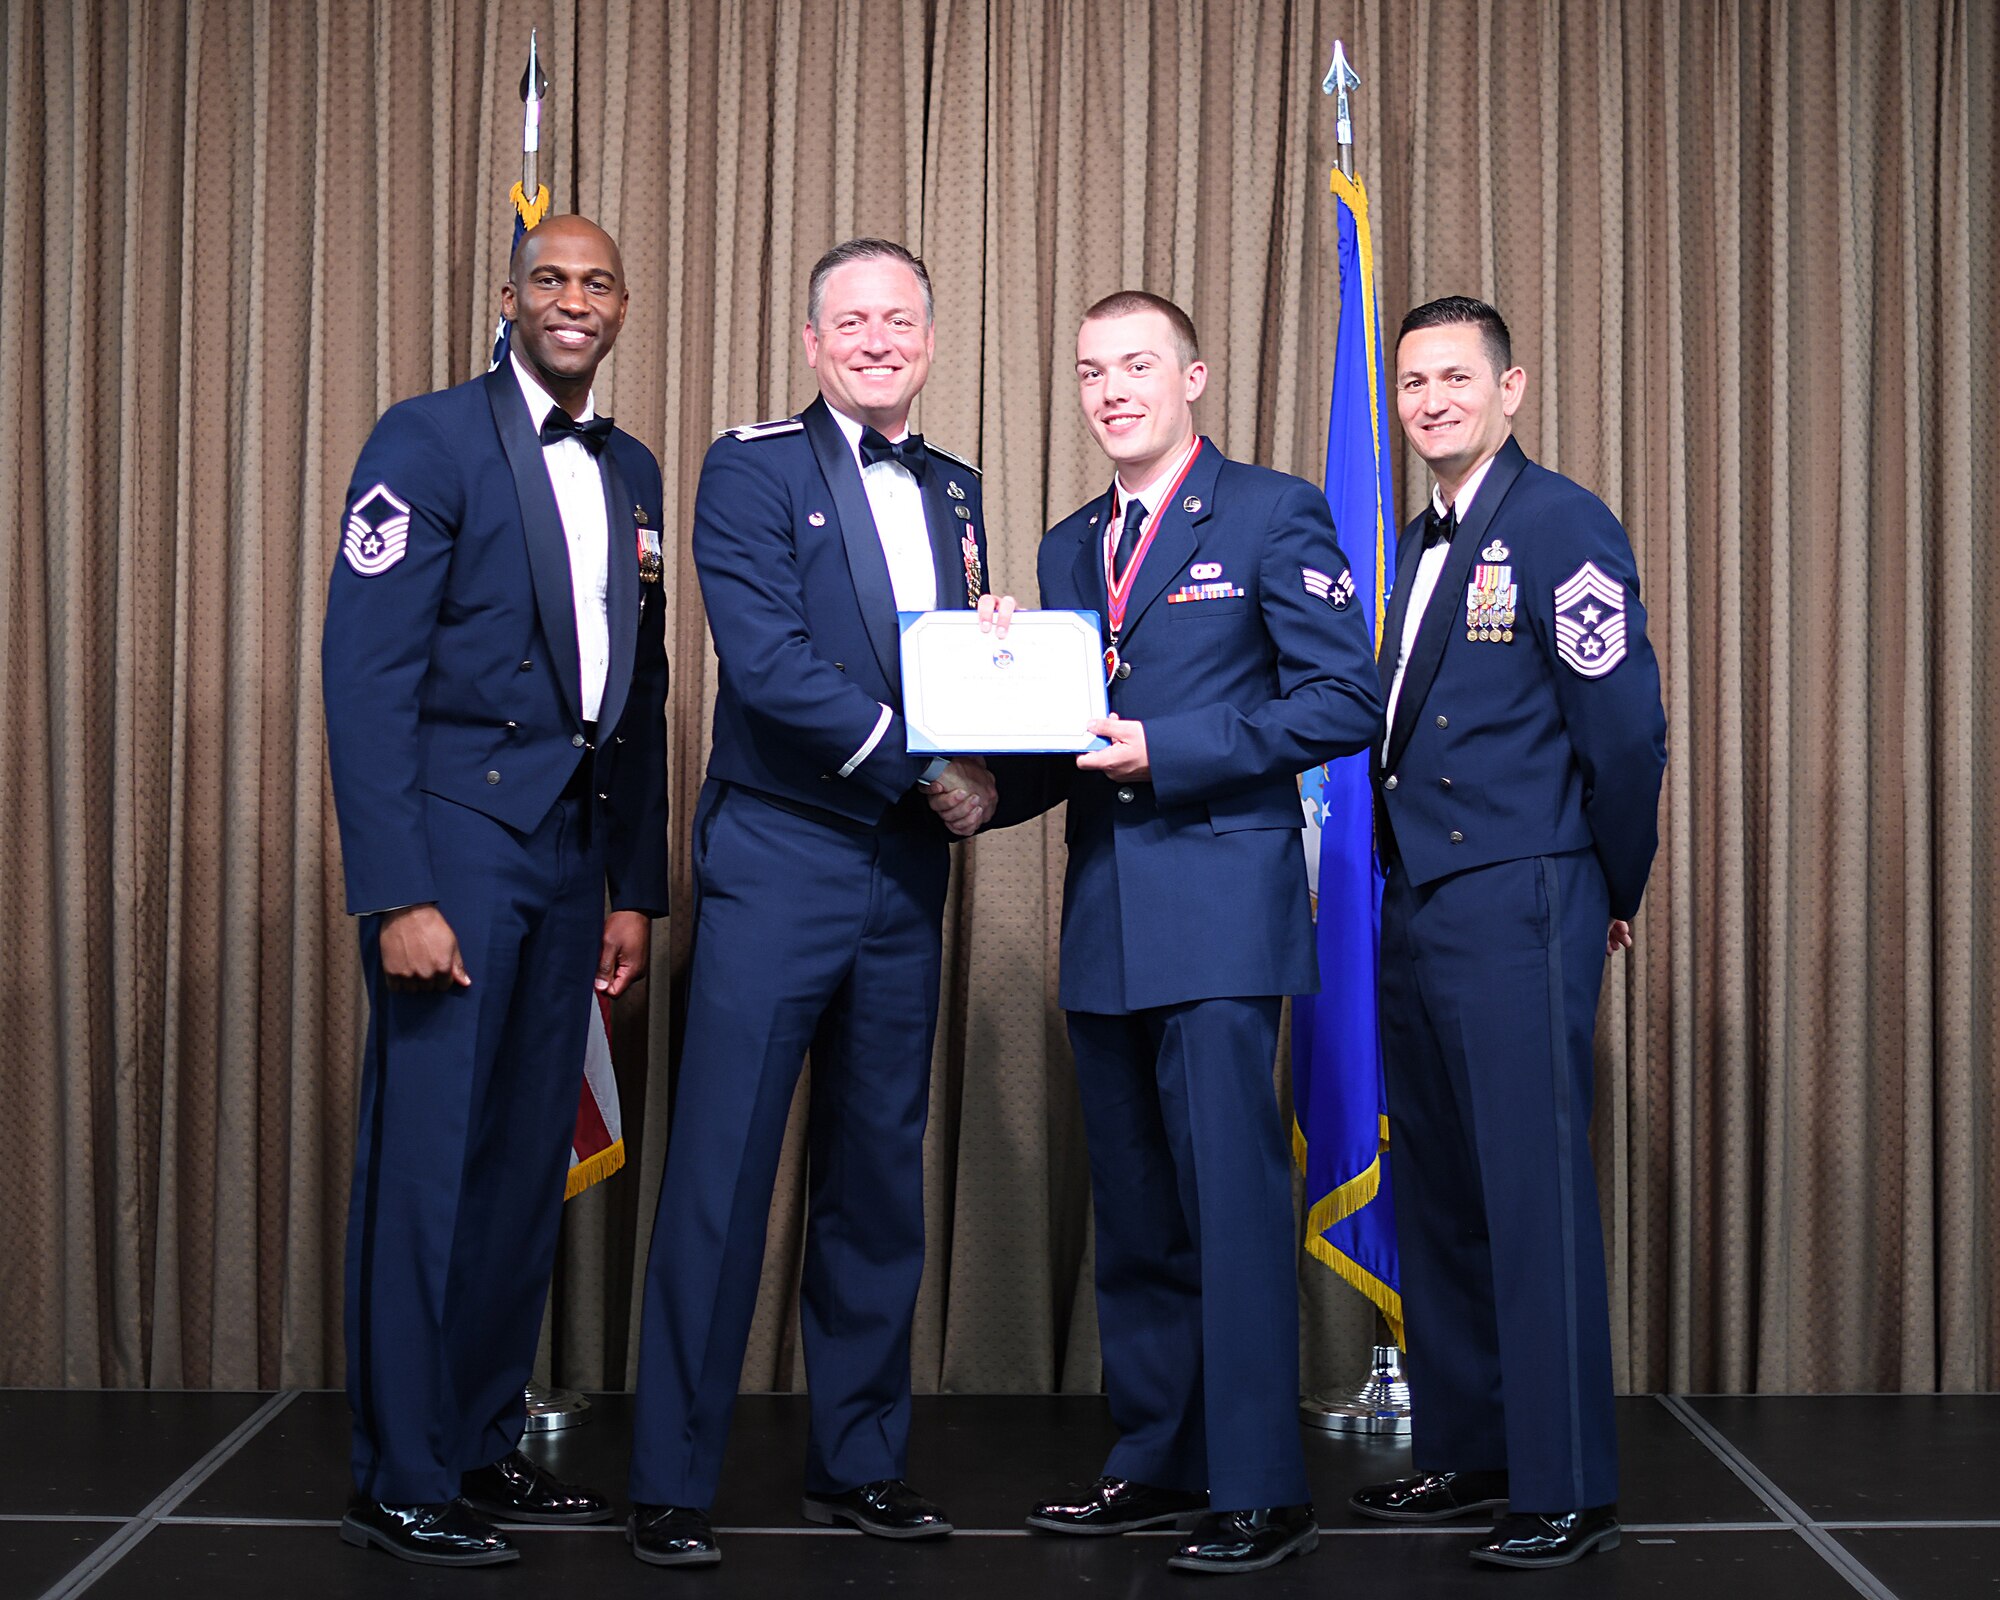 Col. Benjamin Spencer, 319th Air Base Wing commander, presents diploma to SrA Andrew Holman, Etchberger Airman Leadership School graduate, June 20, 2019, on Grand Forks Air Force Base, North Dakota. ALS graduation is the culmination of the first level of the Enlisted Professional Military Education continuum directed toward preparing upcoming noncommissioned officers with leadership skills for their careers. (U.S. Air Force photo by Senior Airman Elijaih Tiggs)